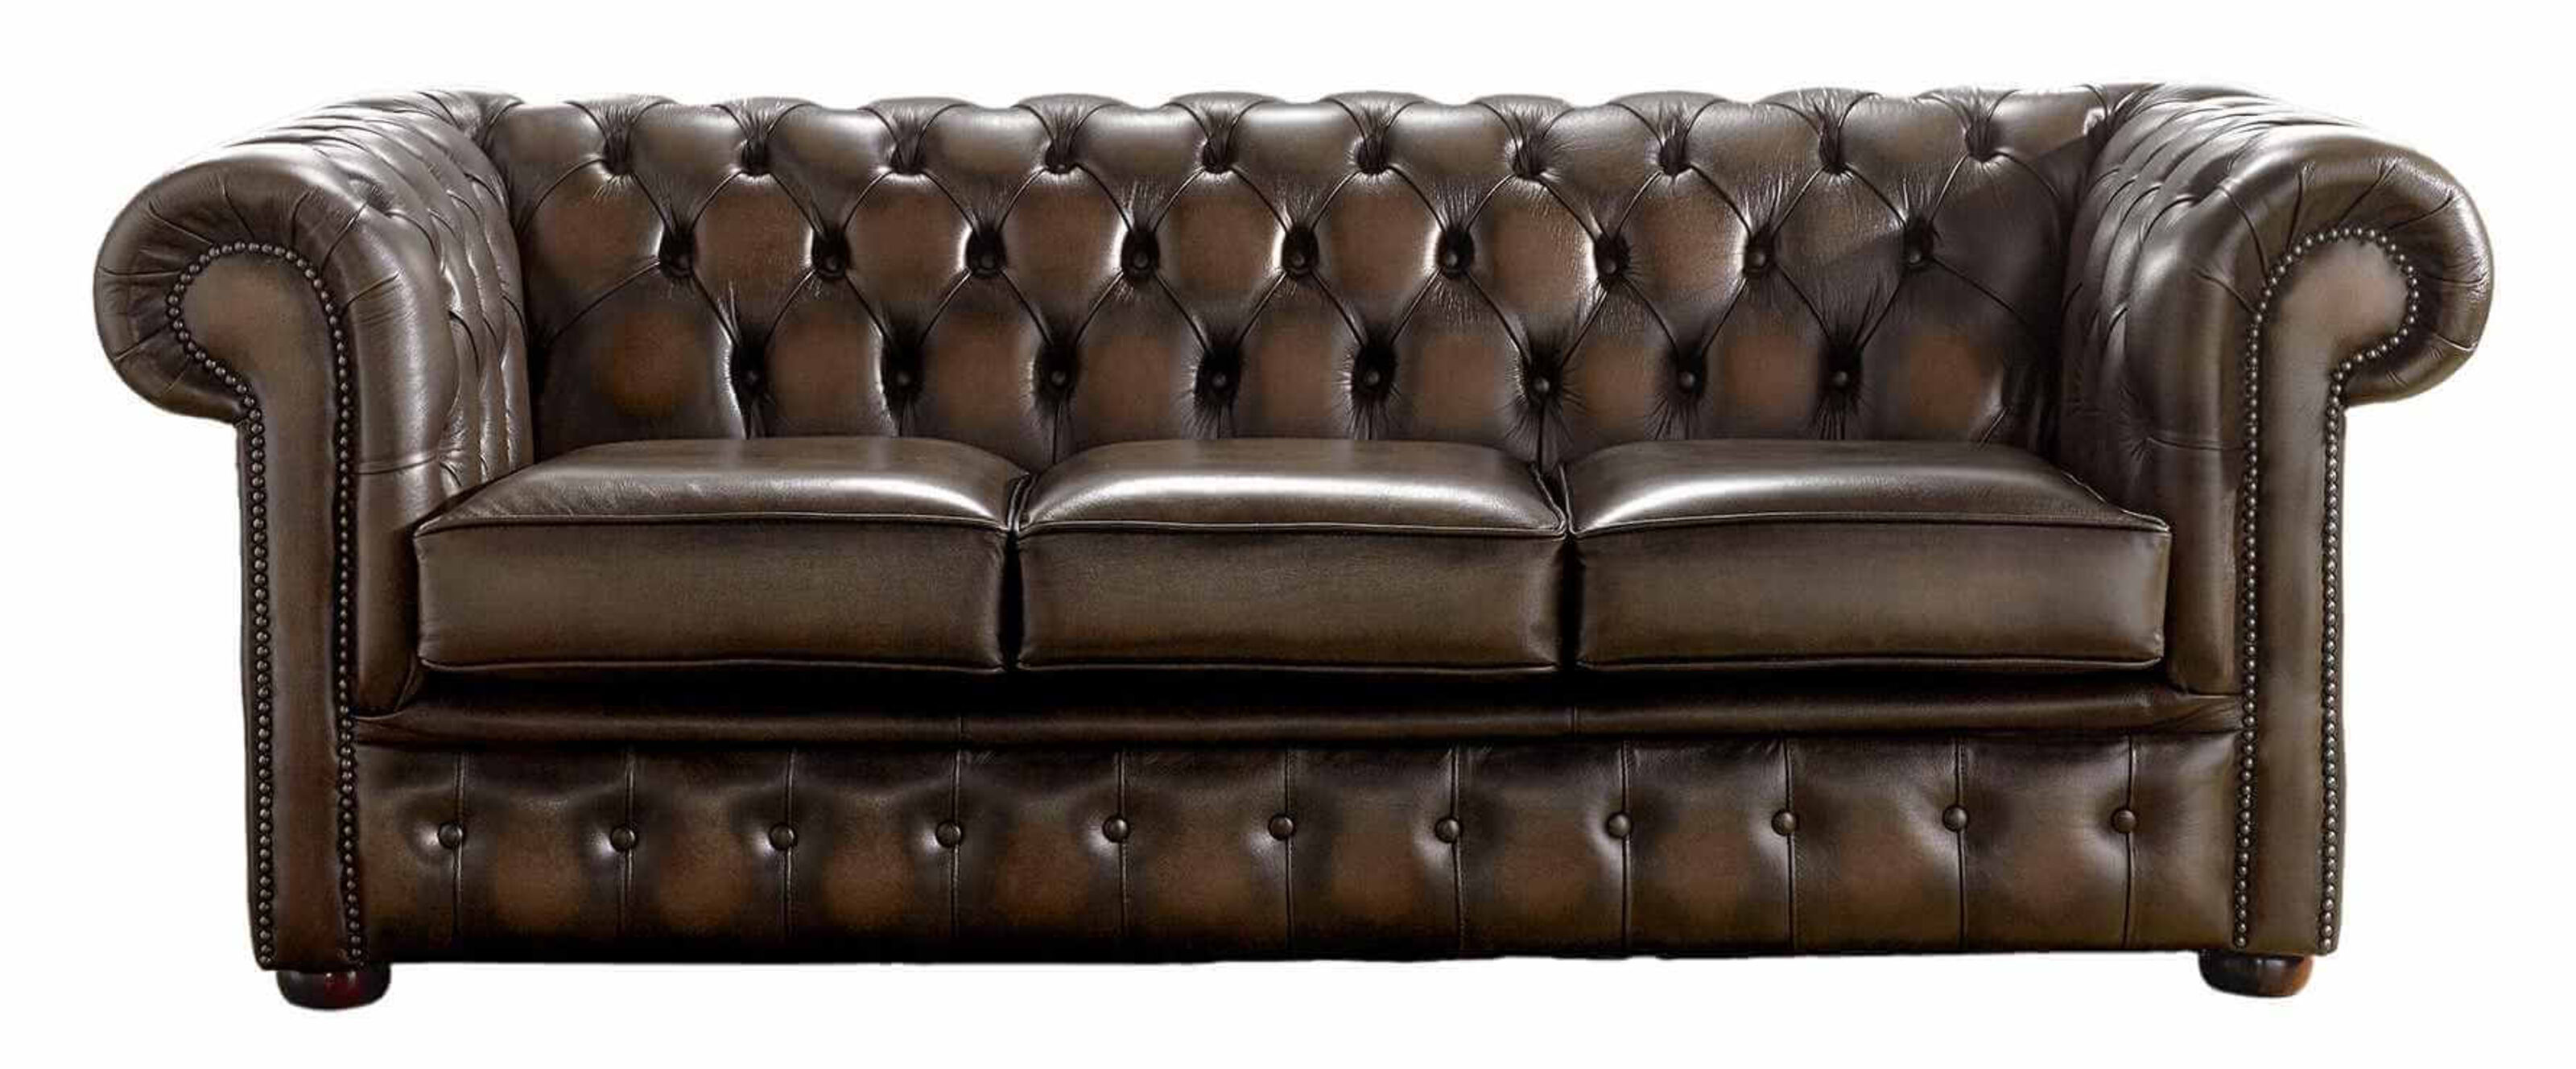 Find Your Perfect Chesterfield Browse Chesterfield Sofas Available Now  %Post Title